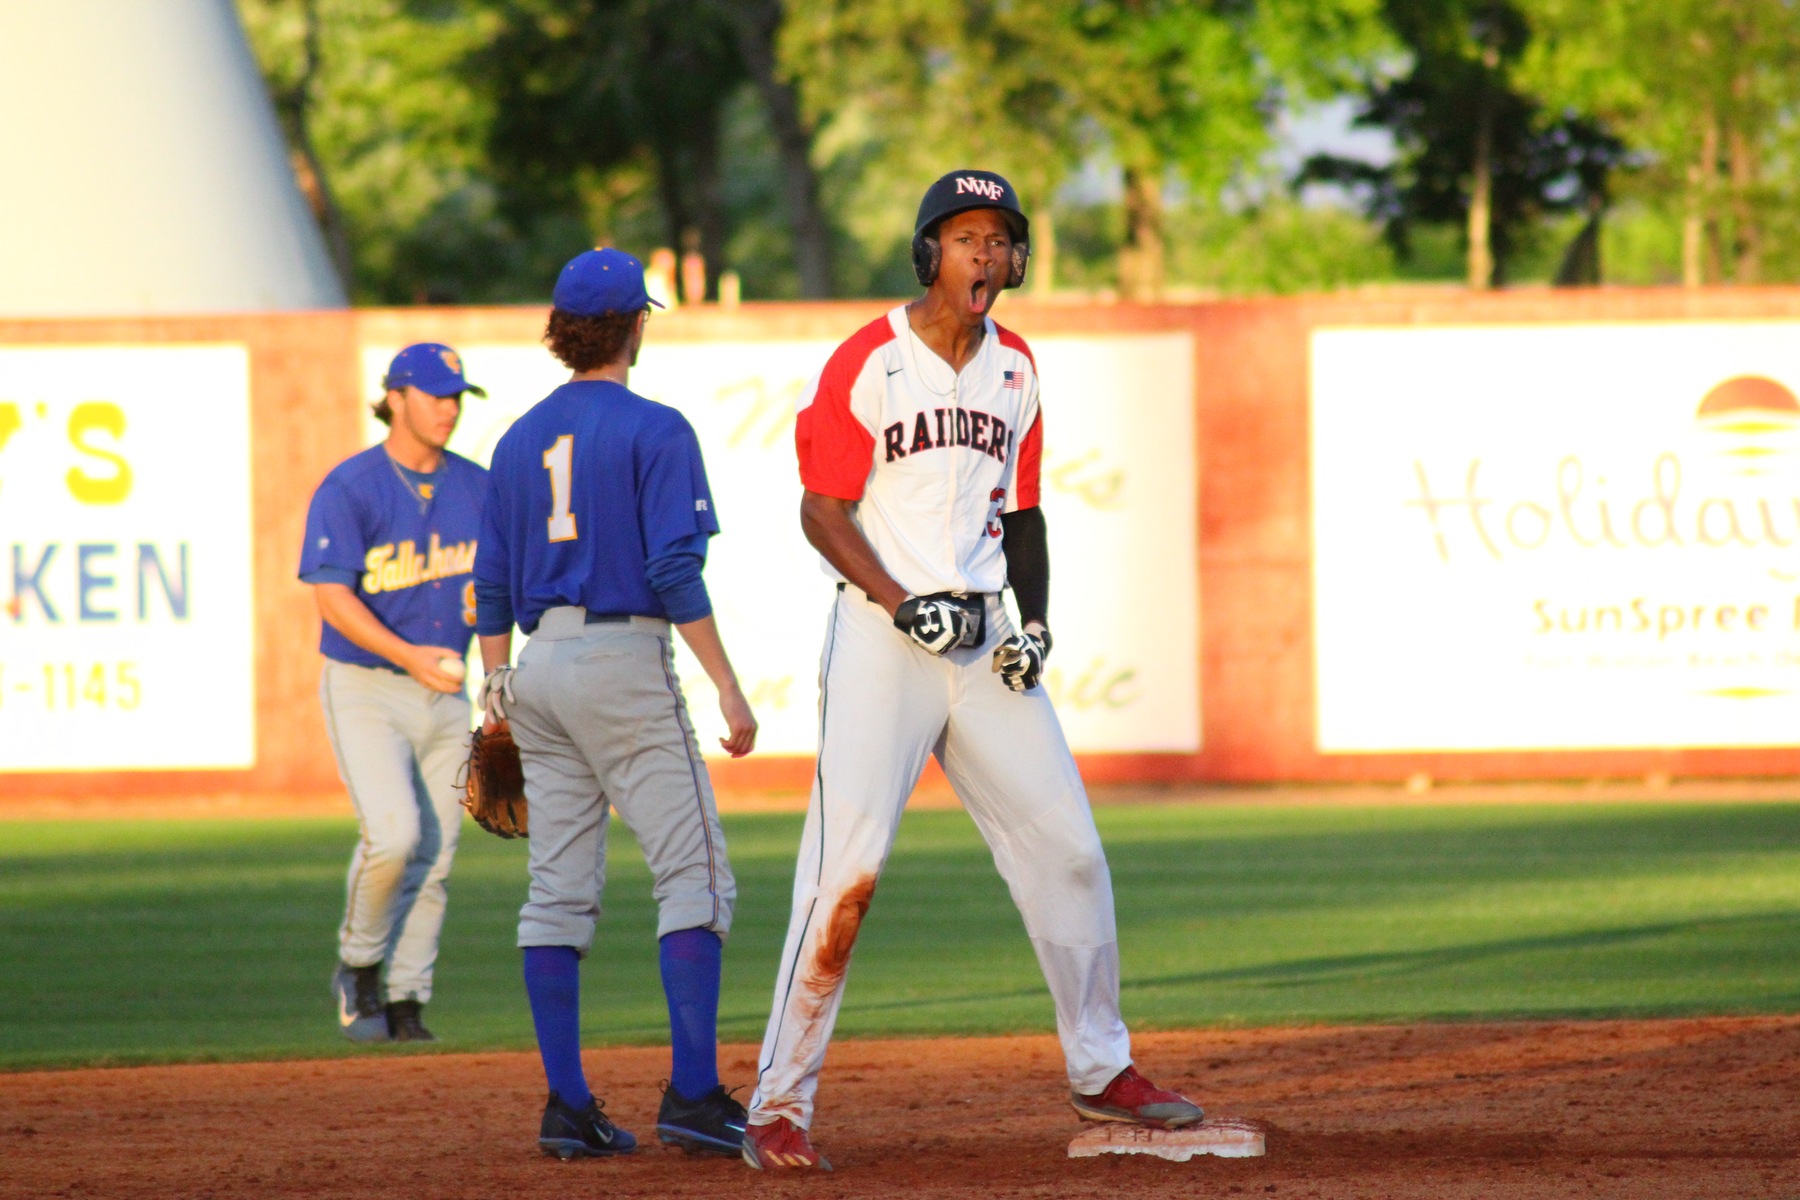 Raiders clinch share of conference with walk-off against Tallahassee